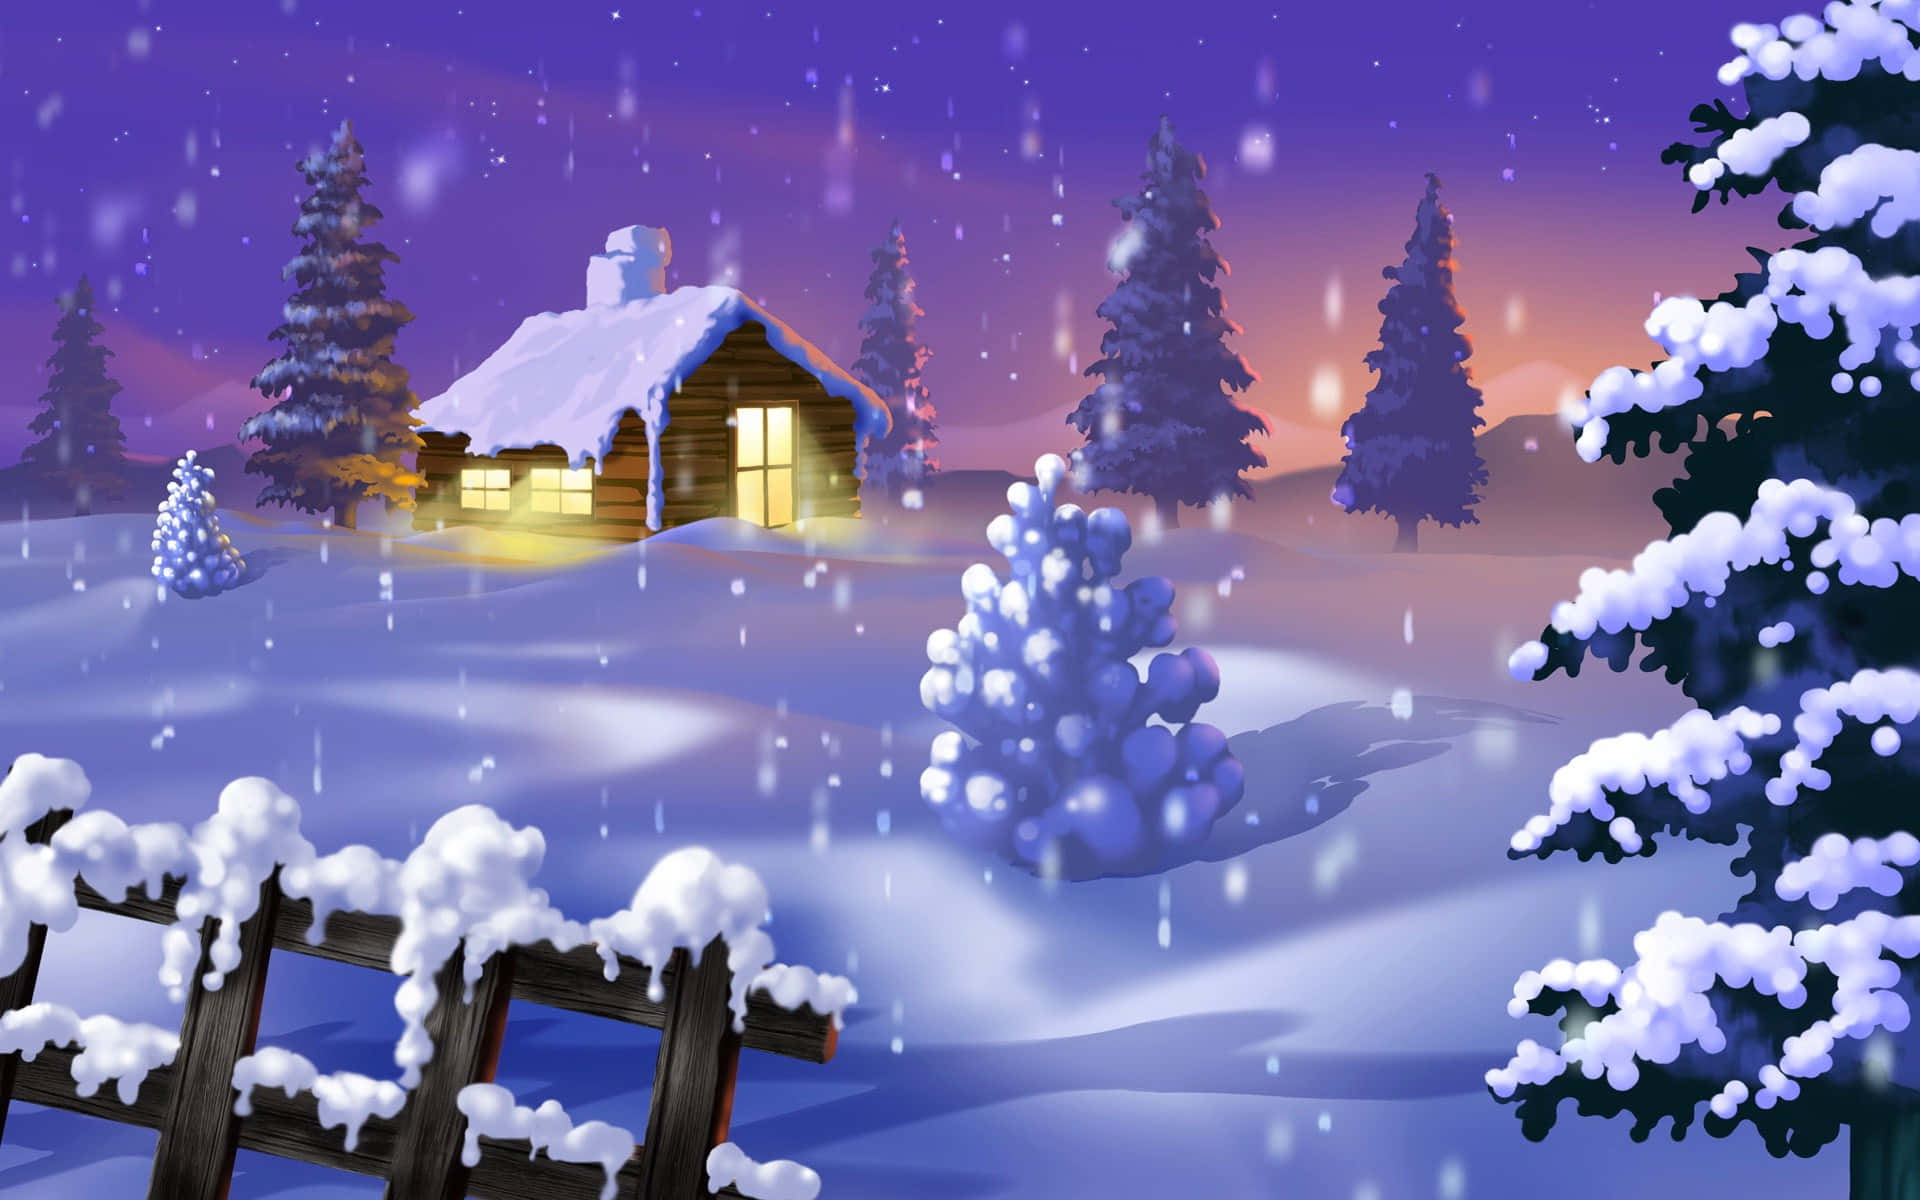 Celebrate Christmas in the snow with family and friends